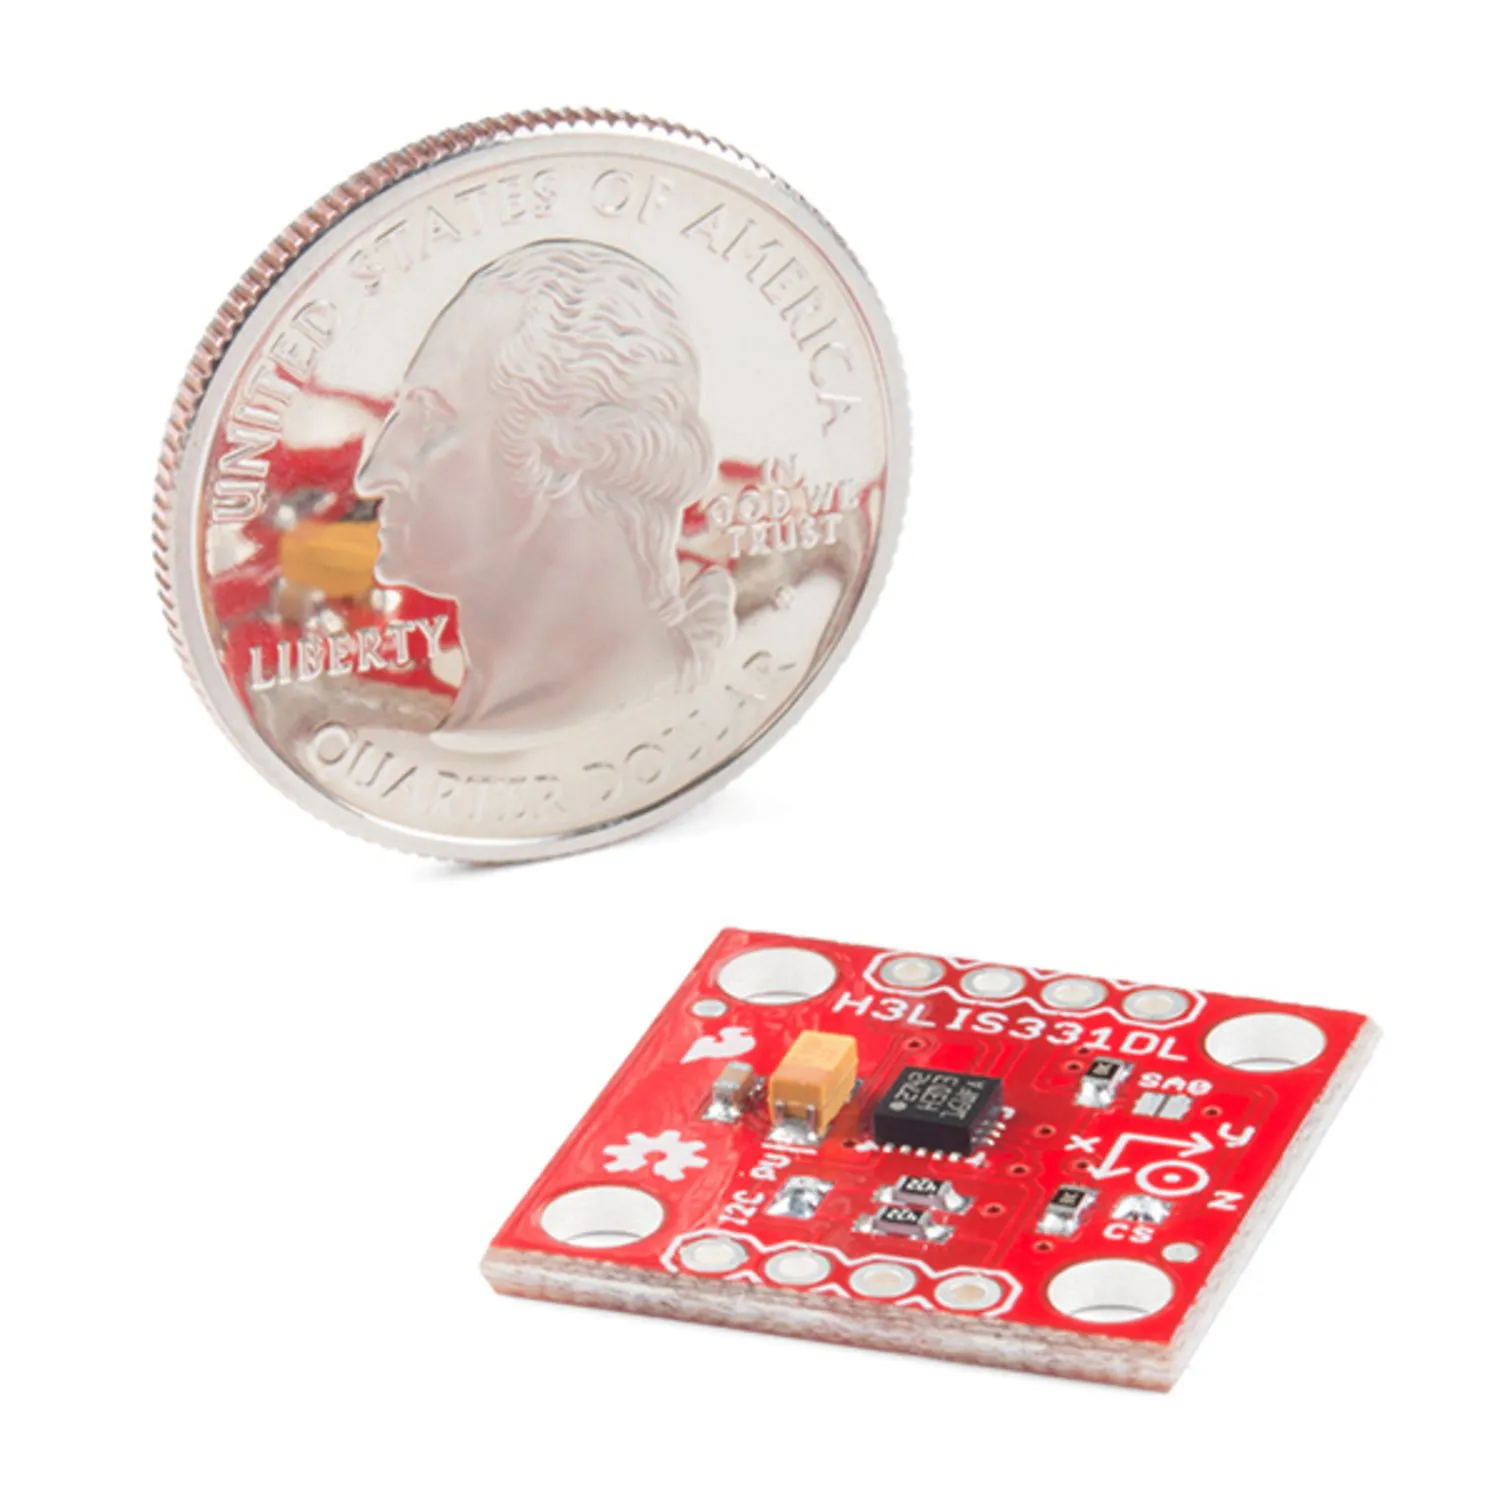 Photo of SparkFun Triple Axis Accelerometer Breakout - H3LIS331DL